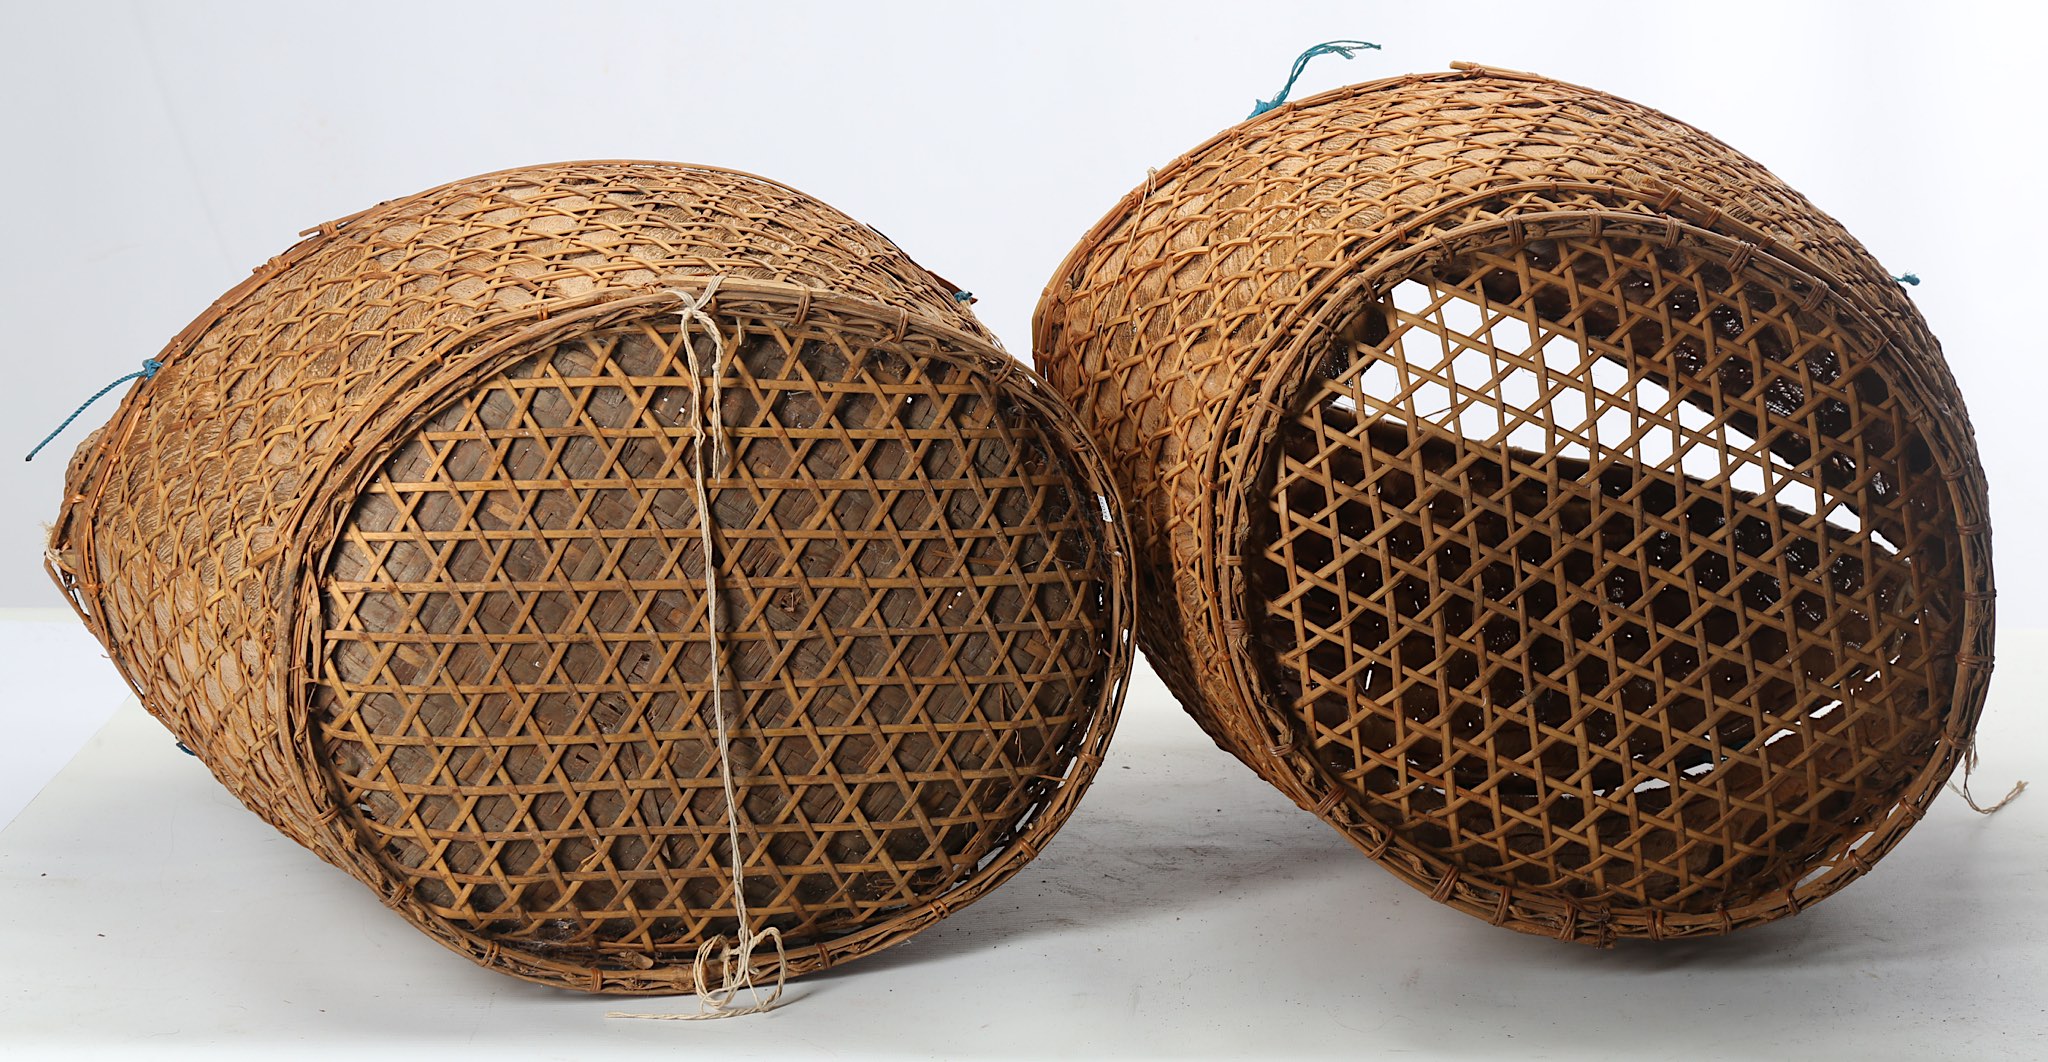 TWO BAMBOO AND RAFFIA LOBSTER BASKETS  Probably from Indonesia, with a flat base the body of the - Image 3 of 3